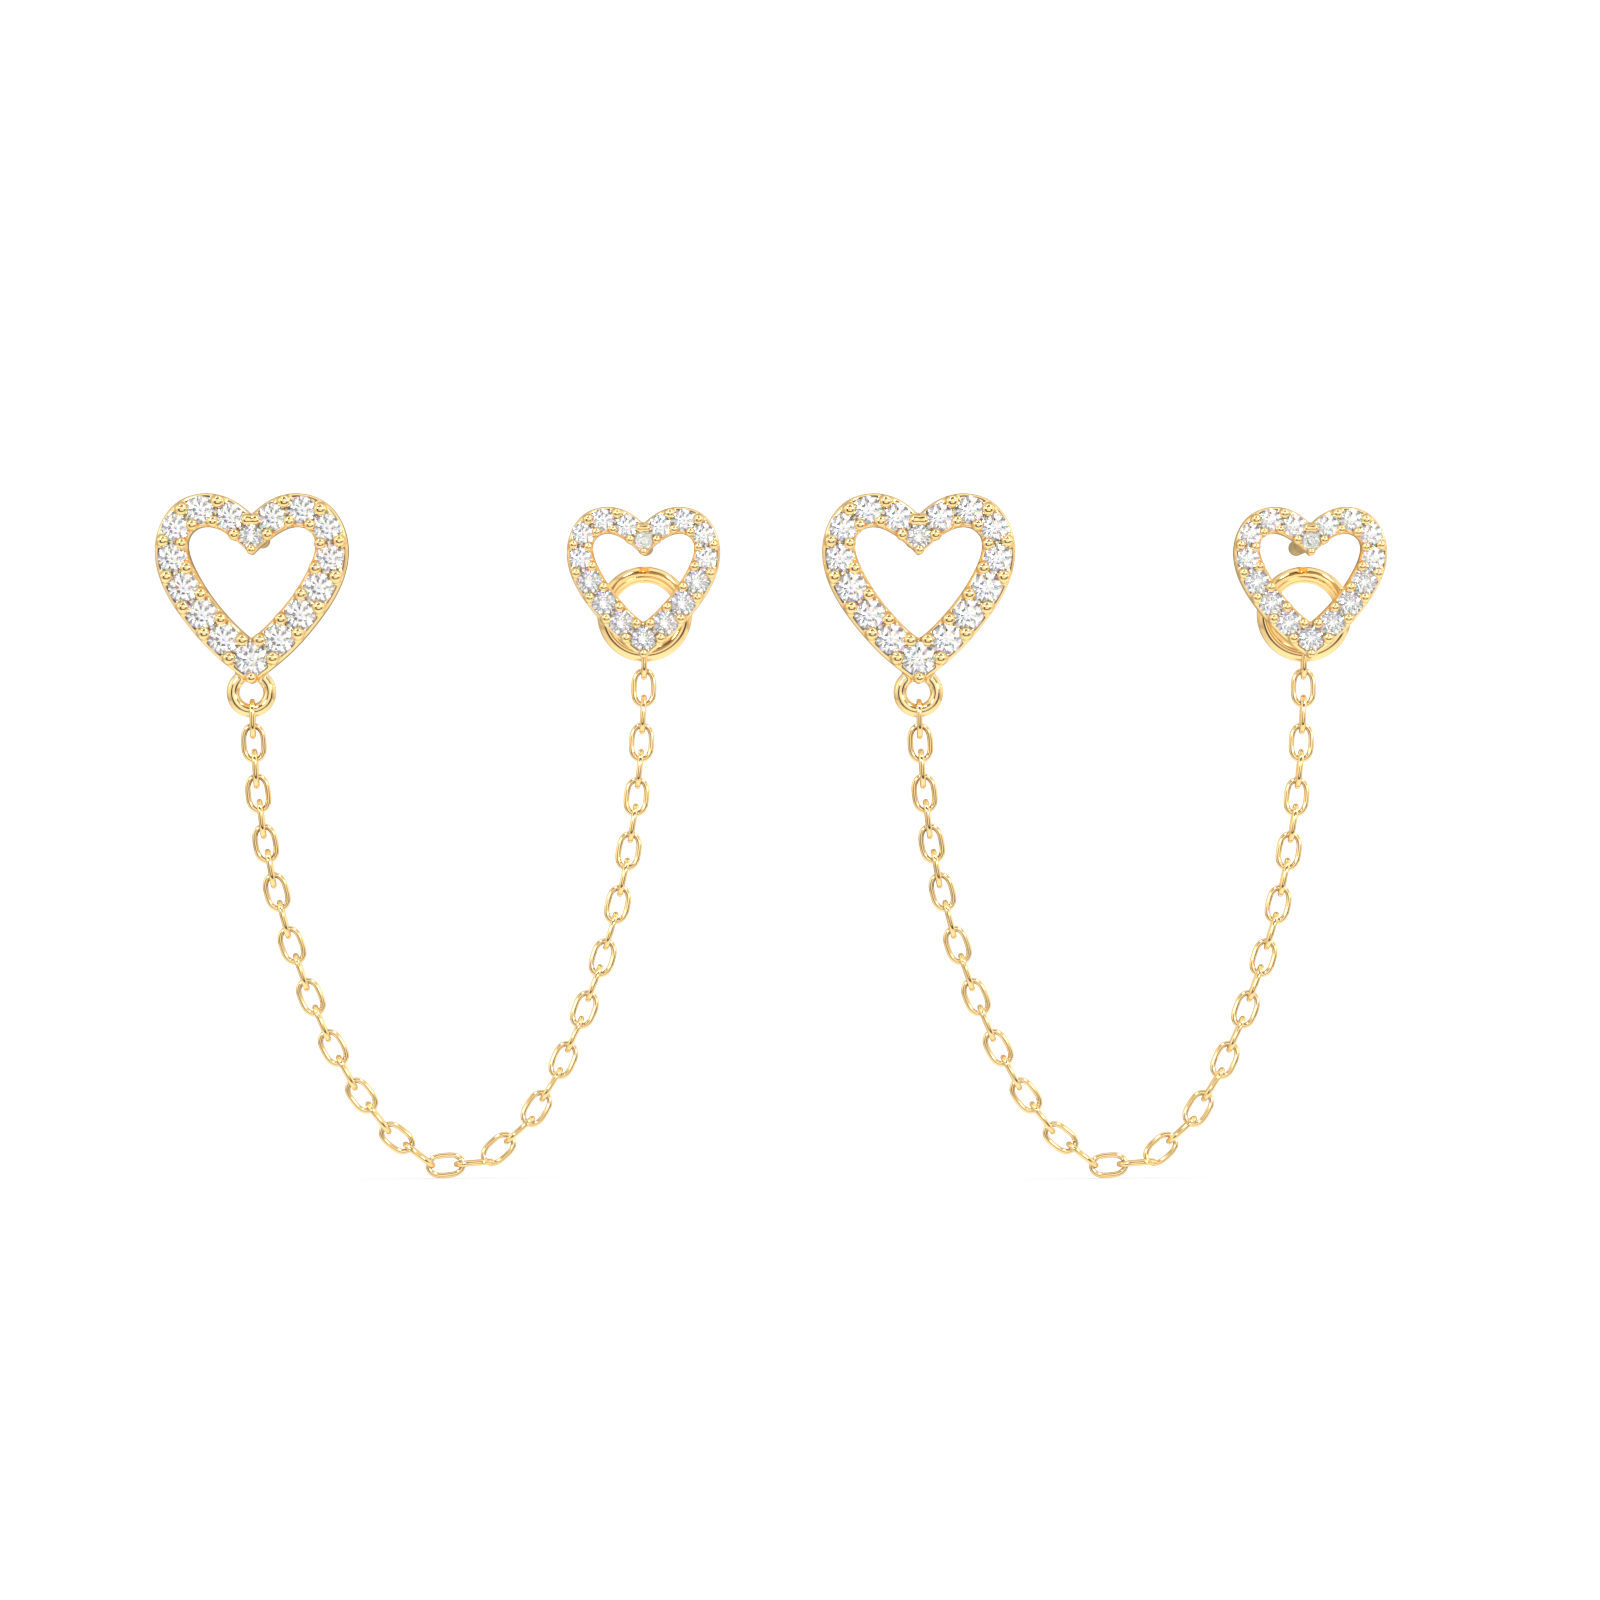 Hollow heart chain connector - 3 in 1